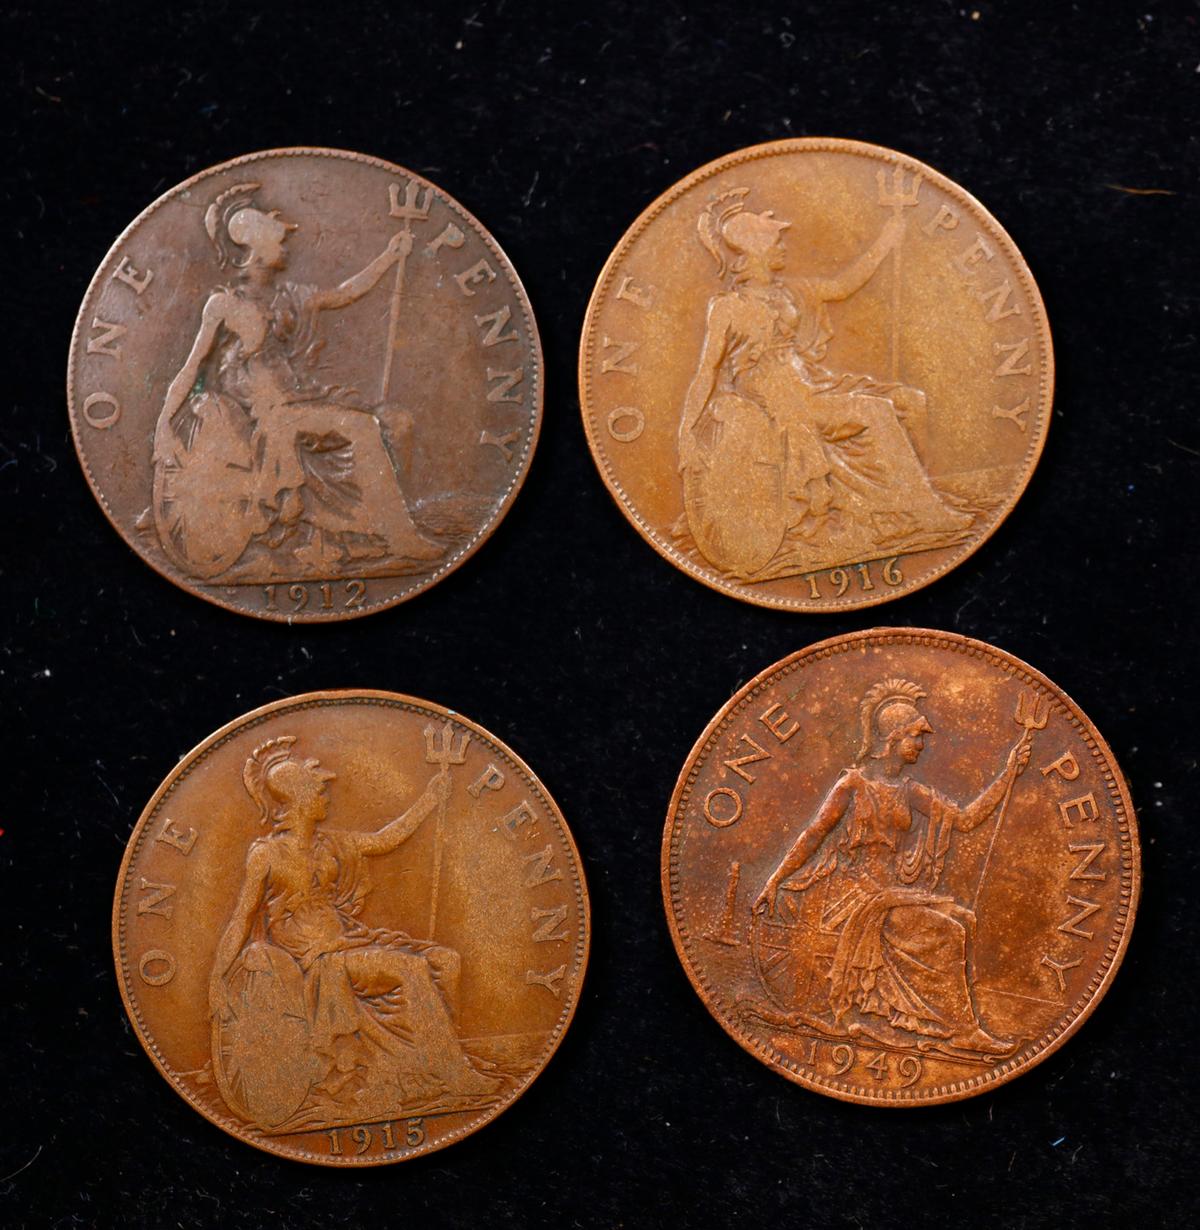 Group of 4 Coins, Great Britain Pennies, 1912, 1915, 1916, 1949 .